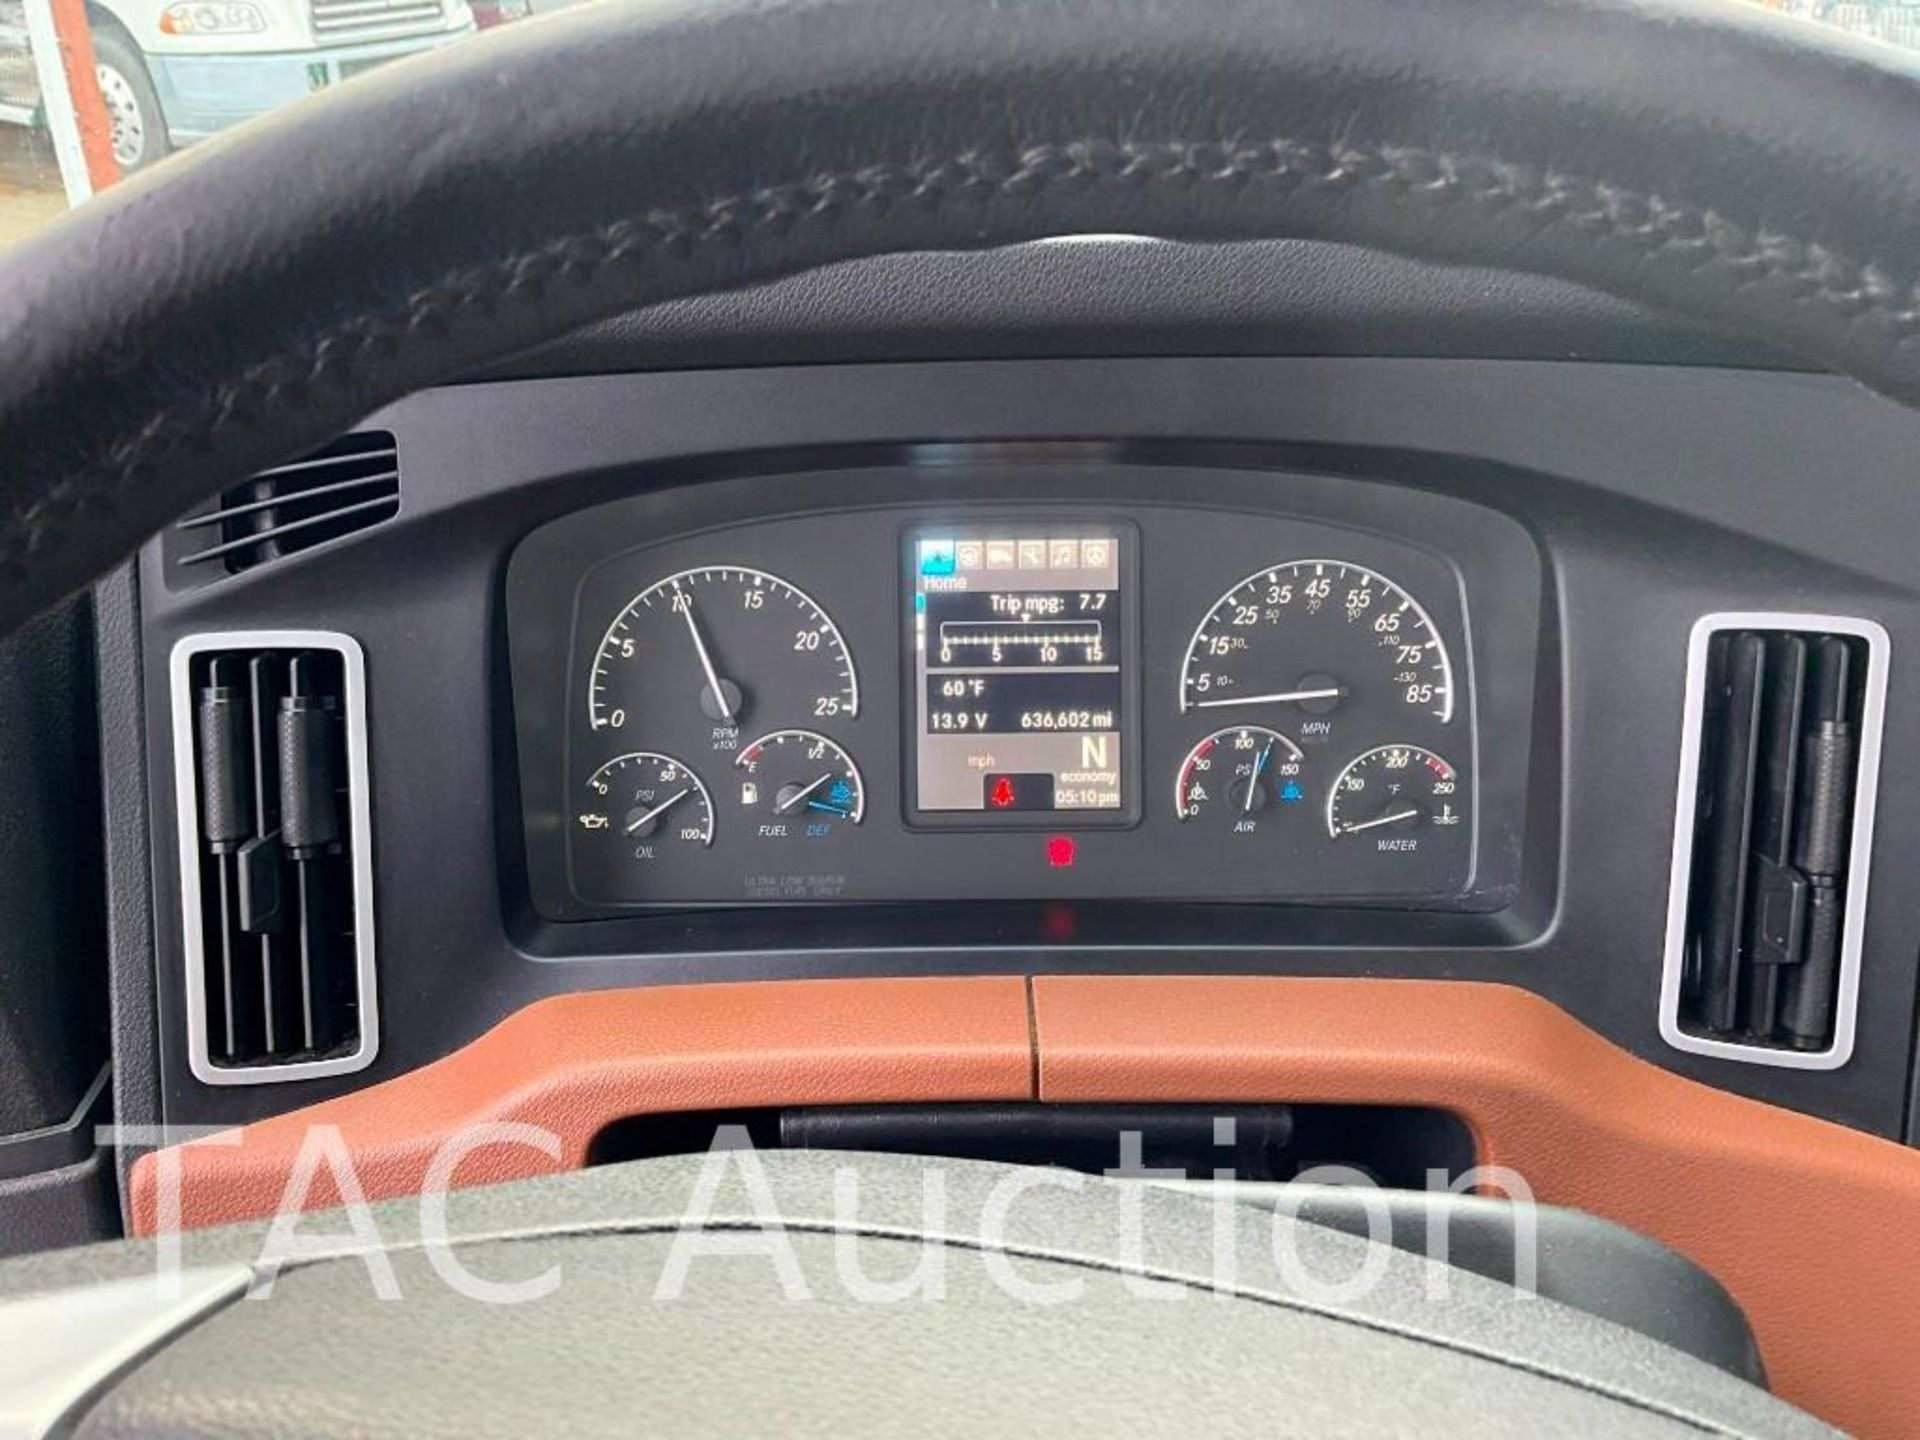 2019 Freightliner Cascadia Day Cab - Image 21 of 59